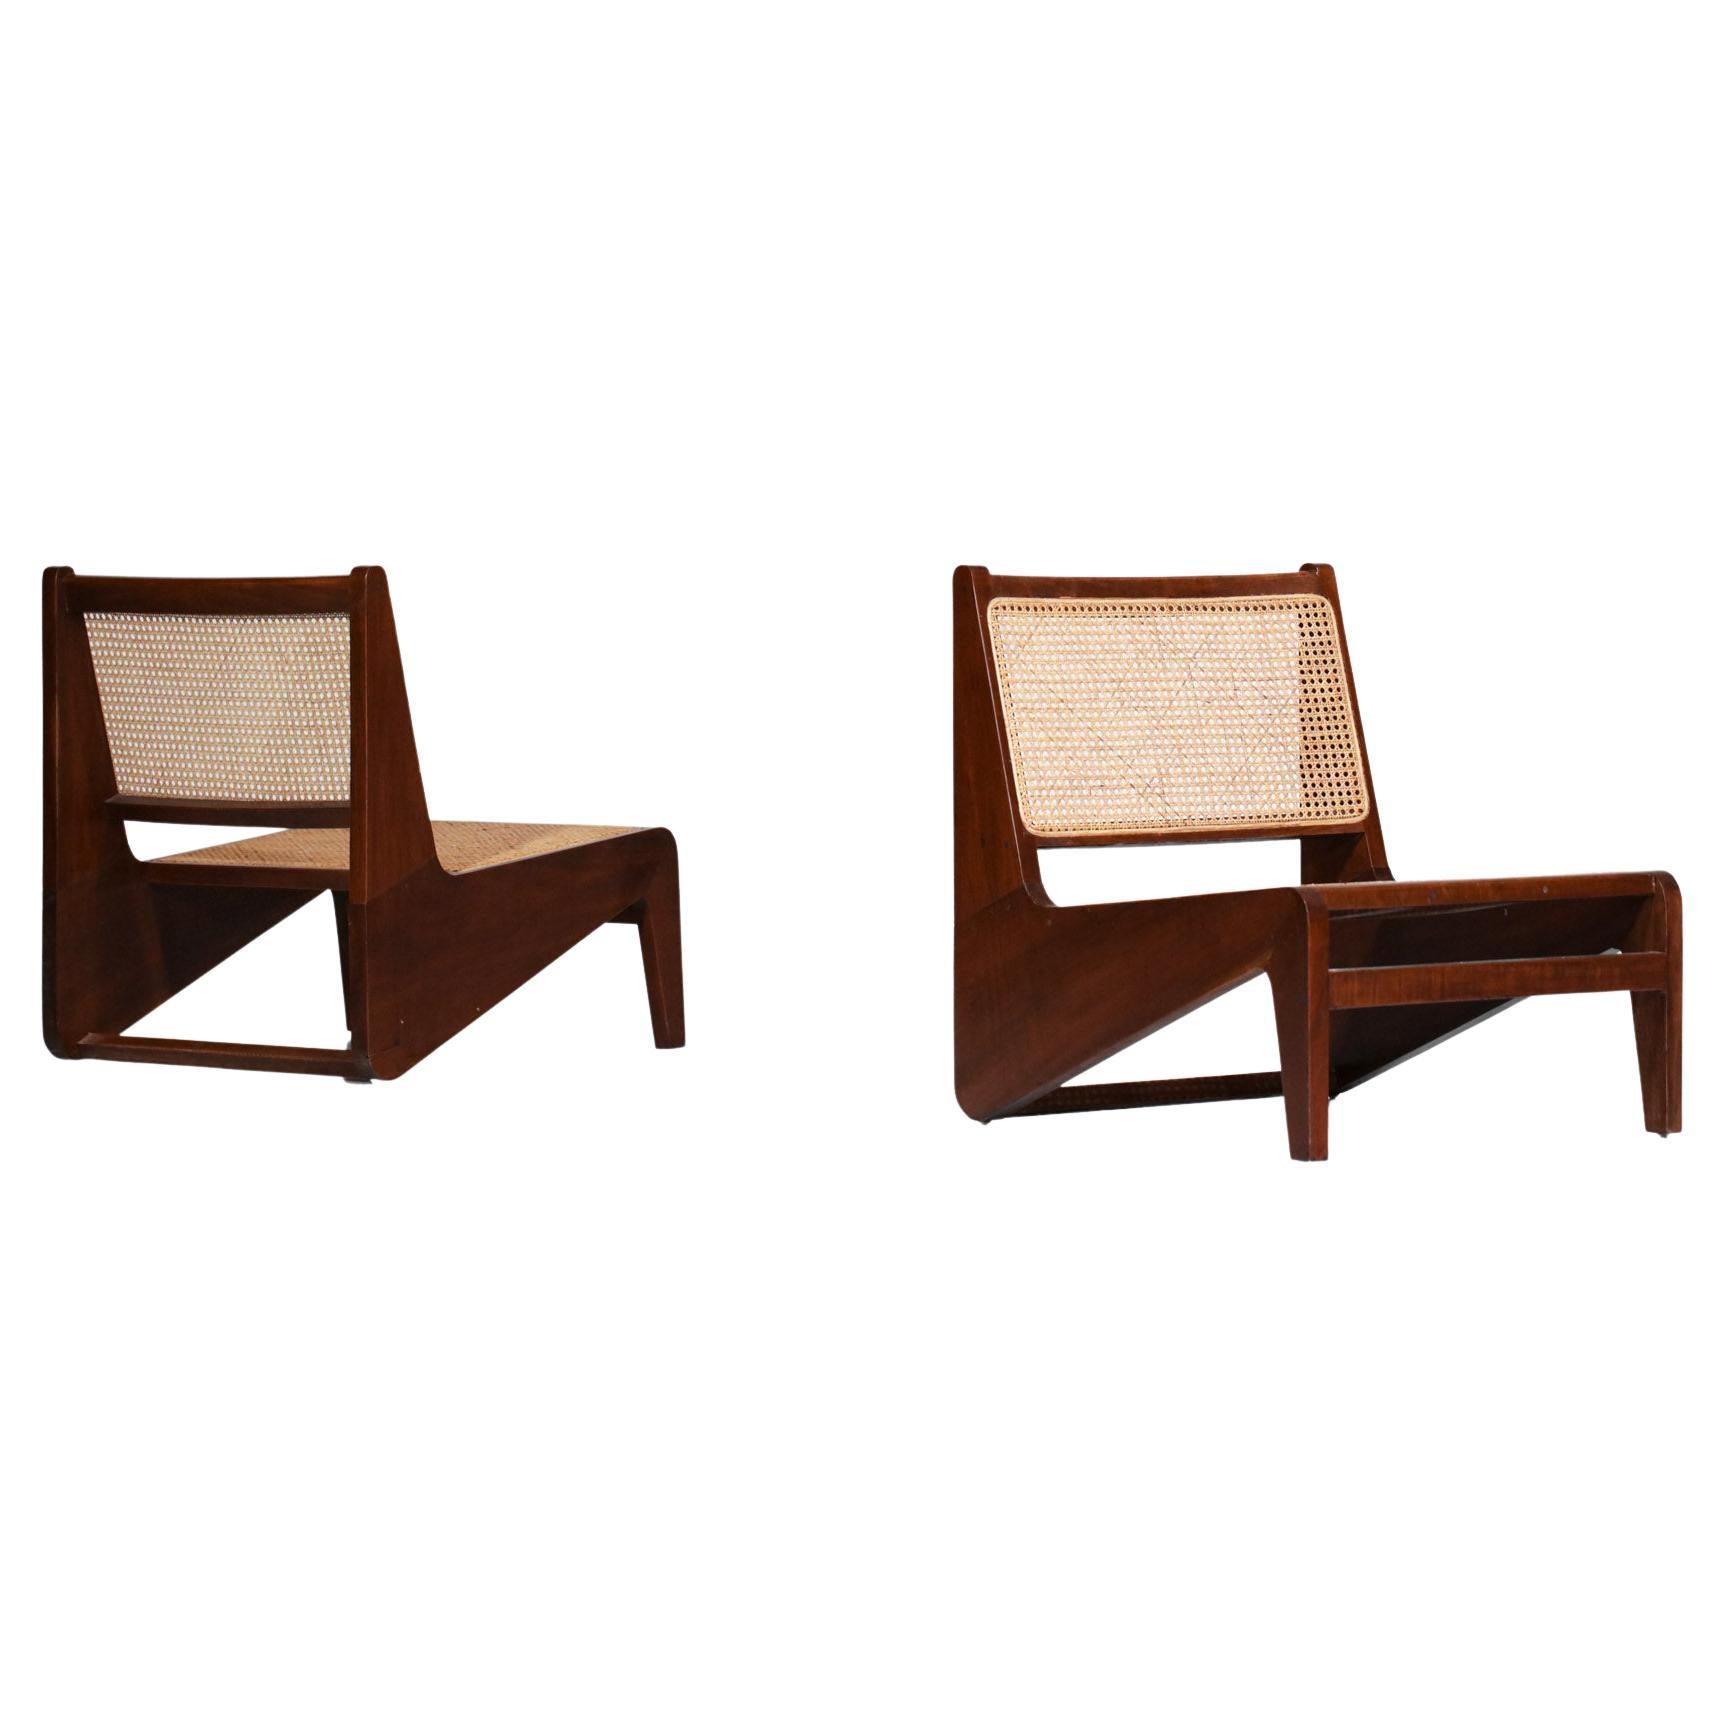 Pair of Armchairs in the "Kangaroo" in Style by Pierre Jeanneret Vintage F180